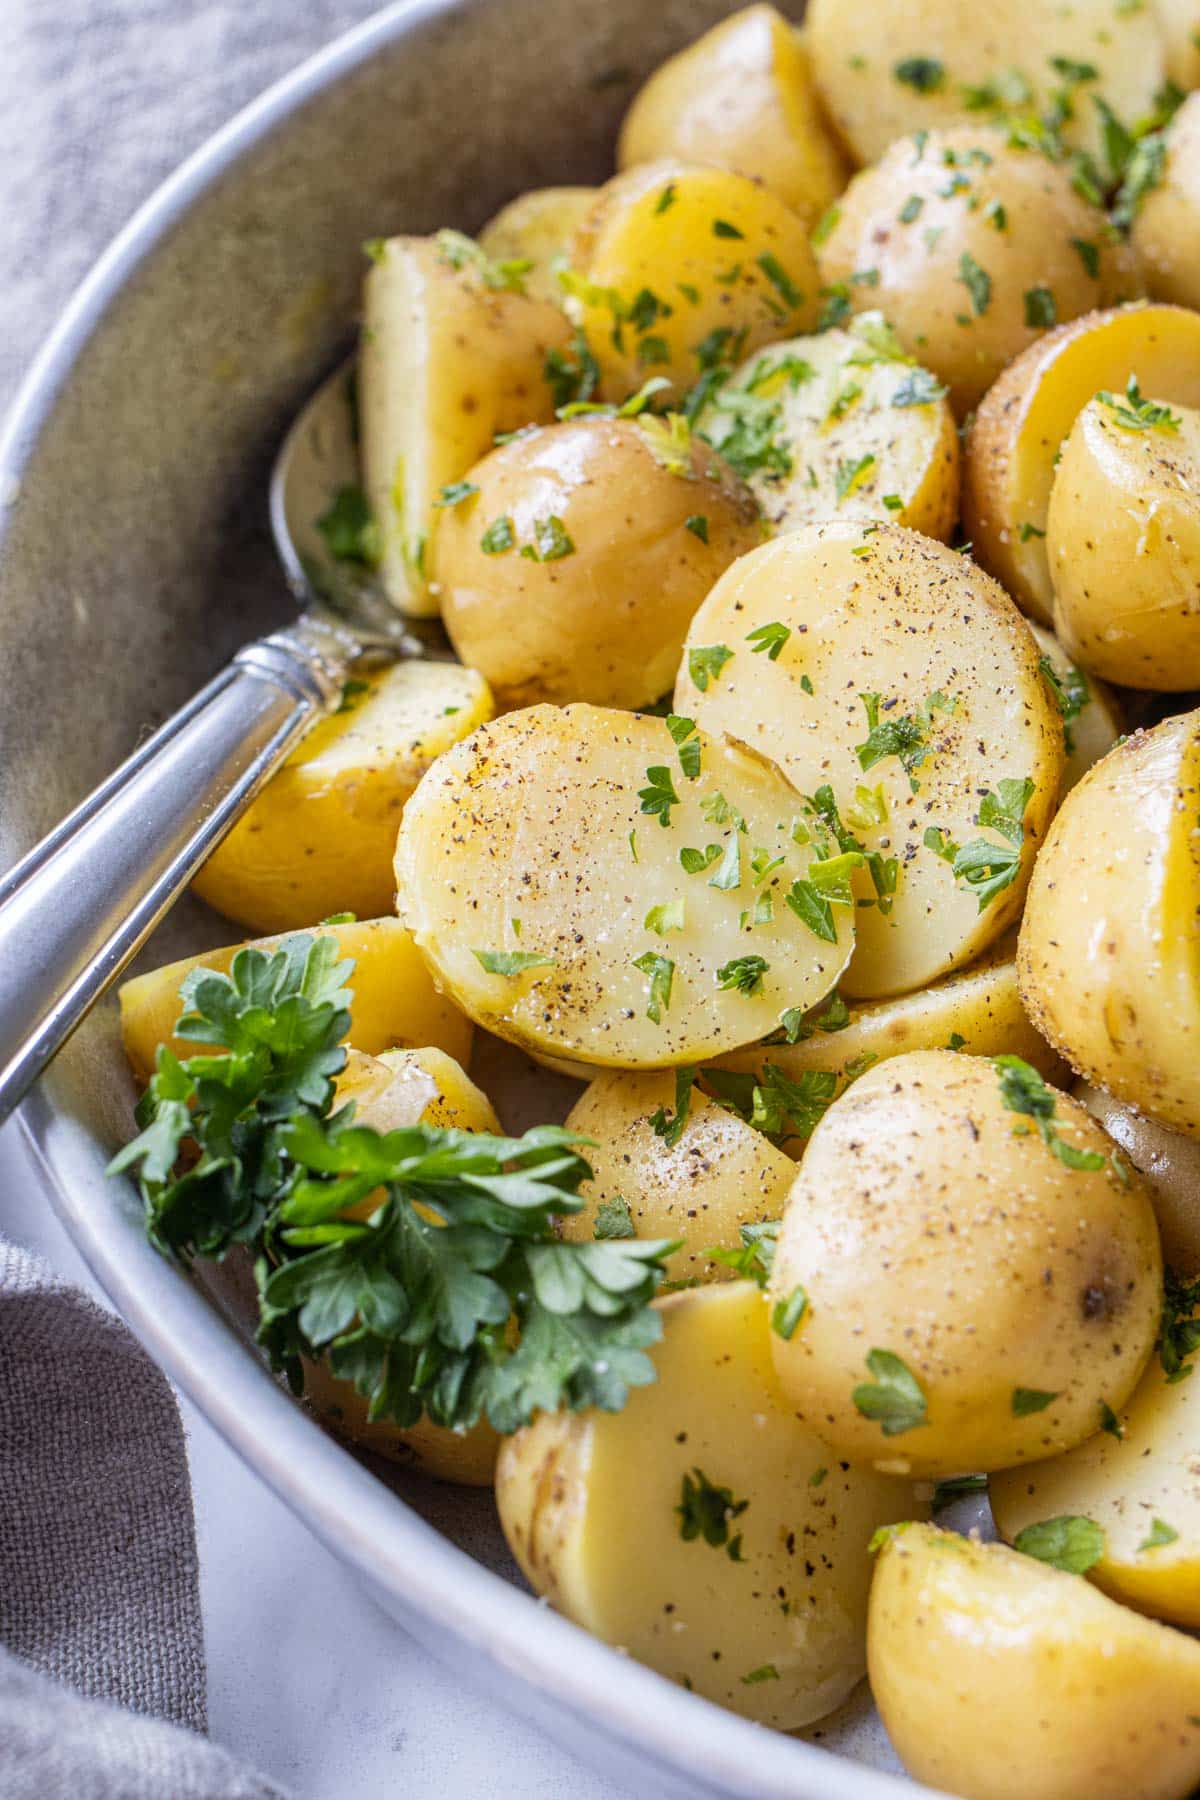 A spoon serving up boiled potatoes from a grey bowl.